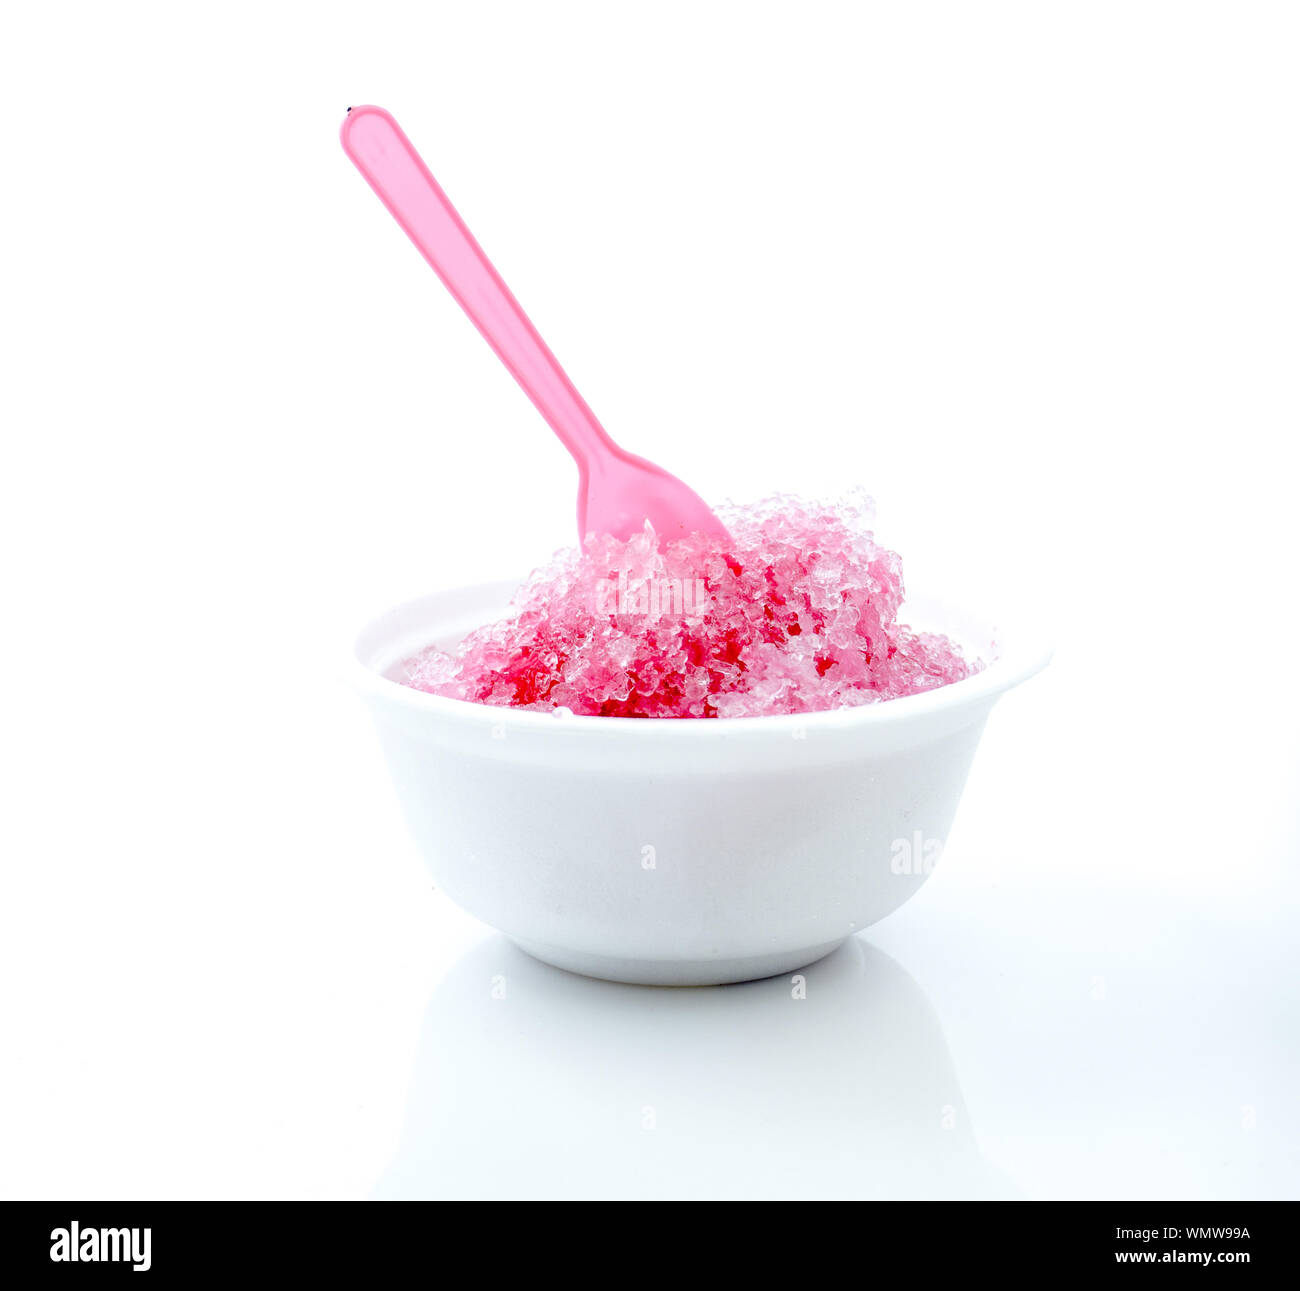 Flavored Ice In Bowl Against White Background Stock Photo